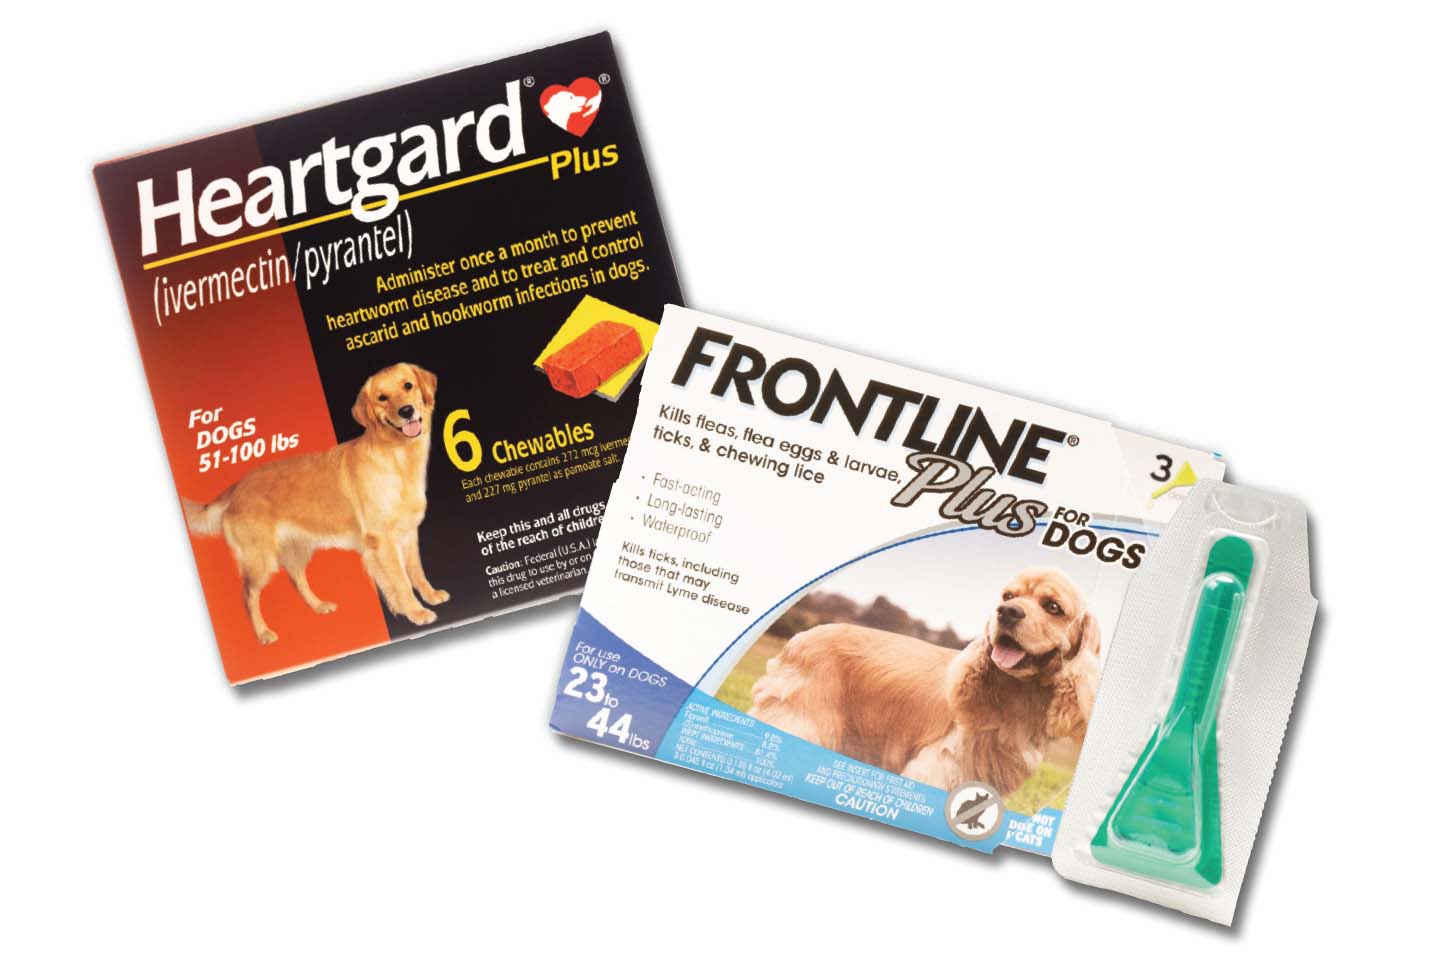 heartgard for heartworms and frontline dog medicine for fleas and ticks